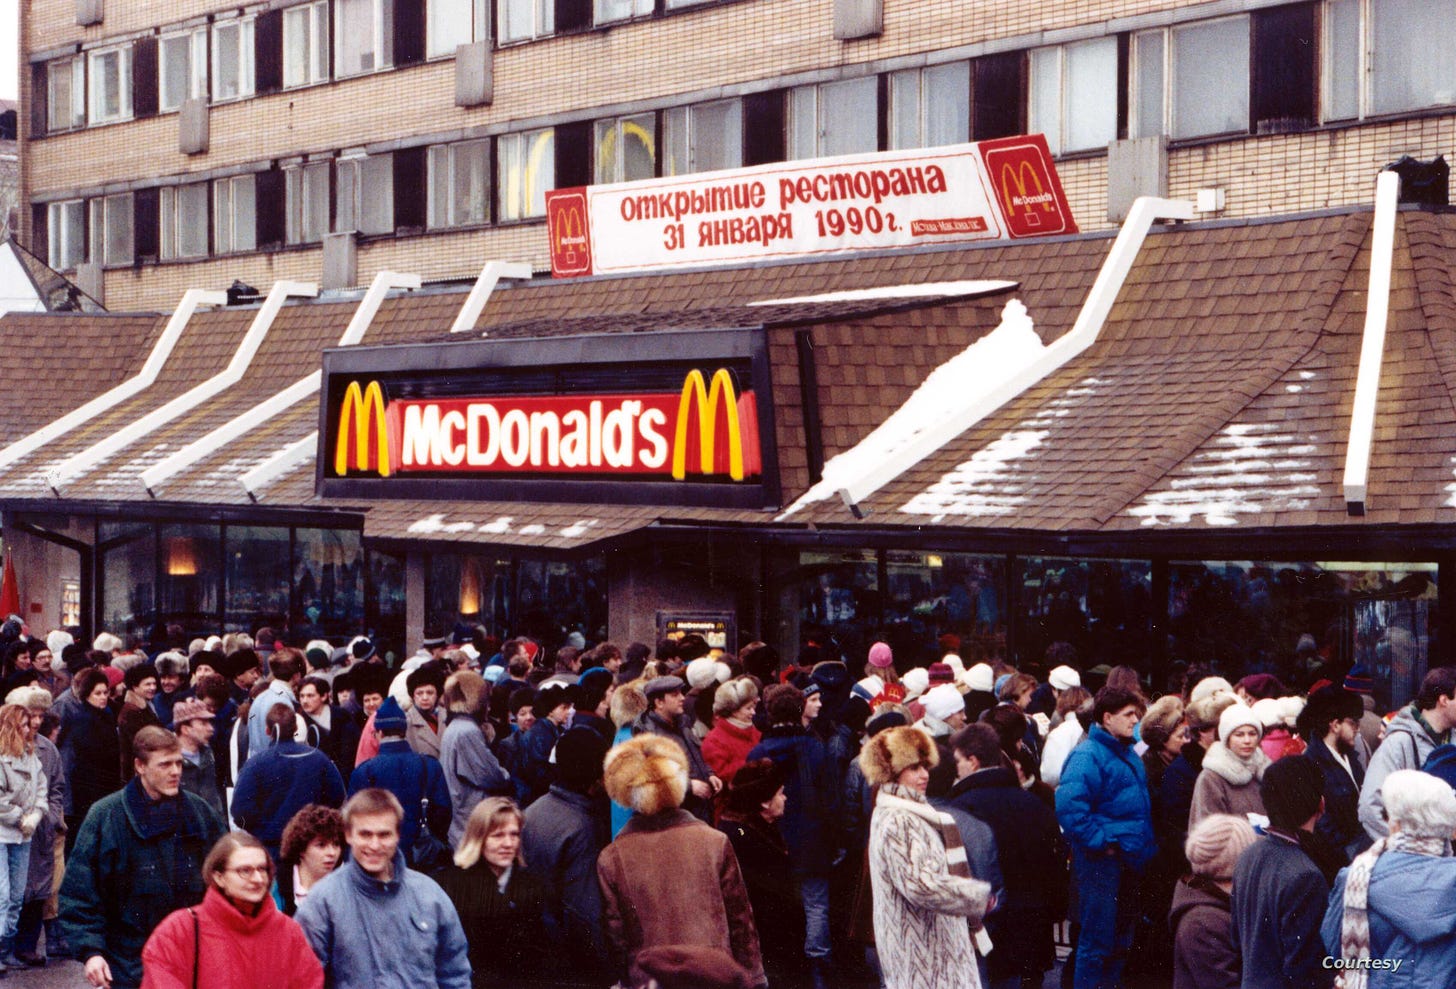 McDonald's Marks 30 Years in Russia | Voice of America - English